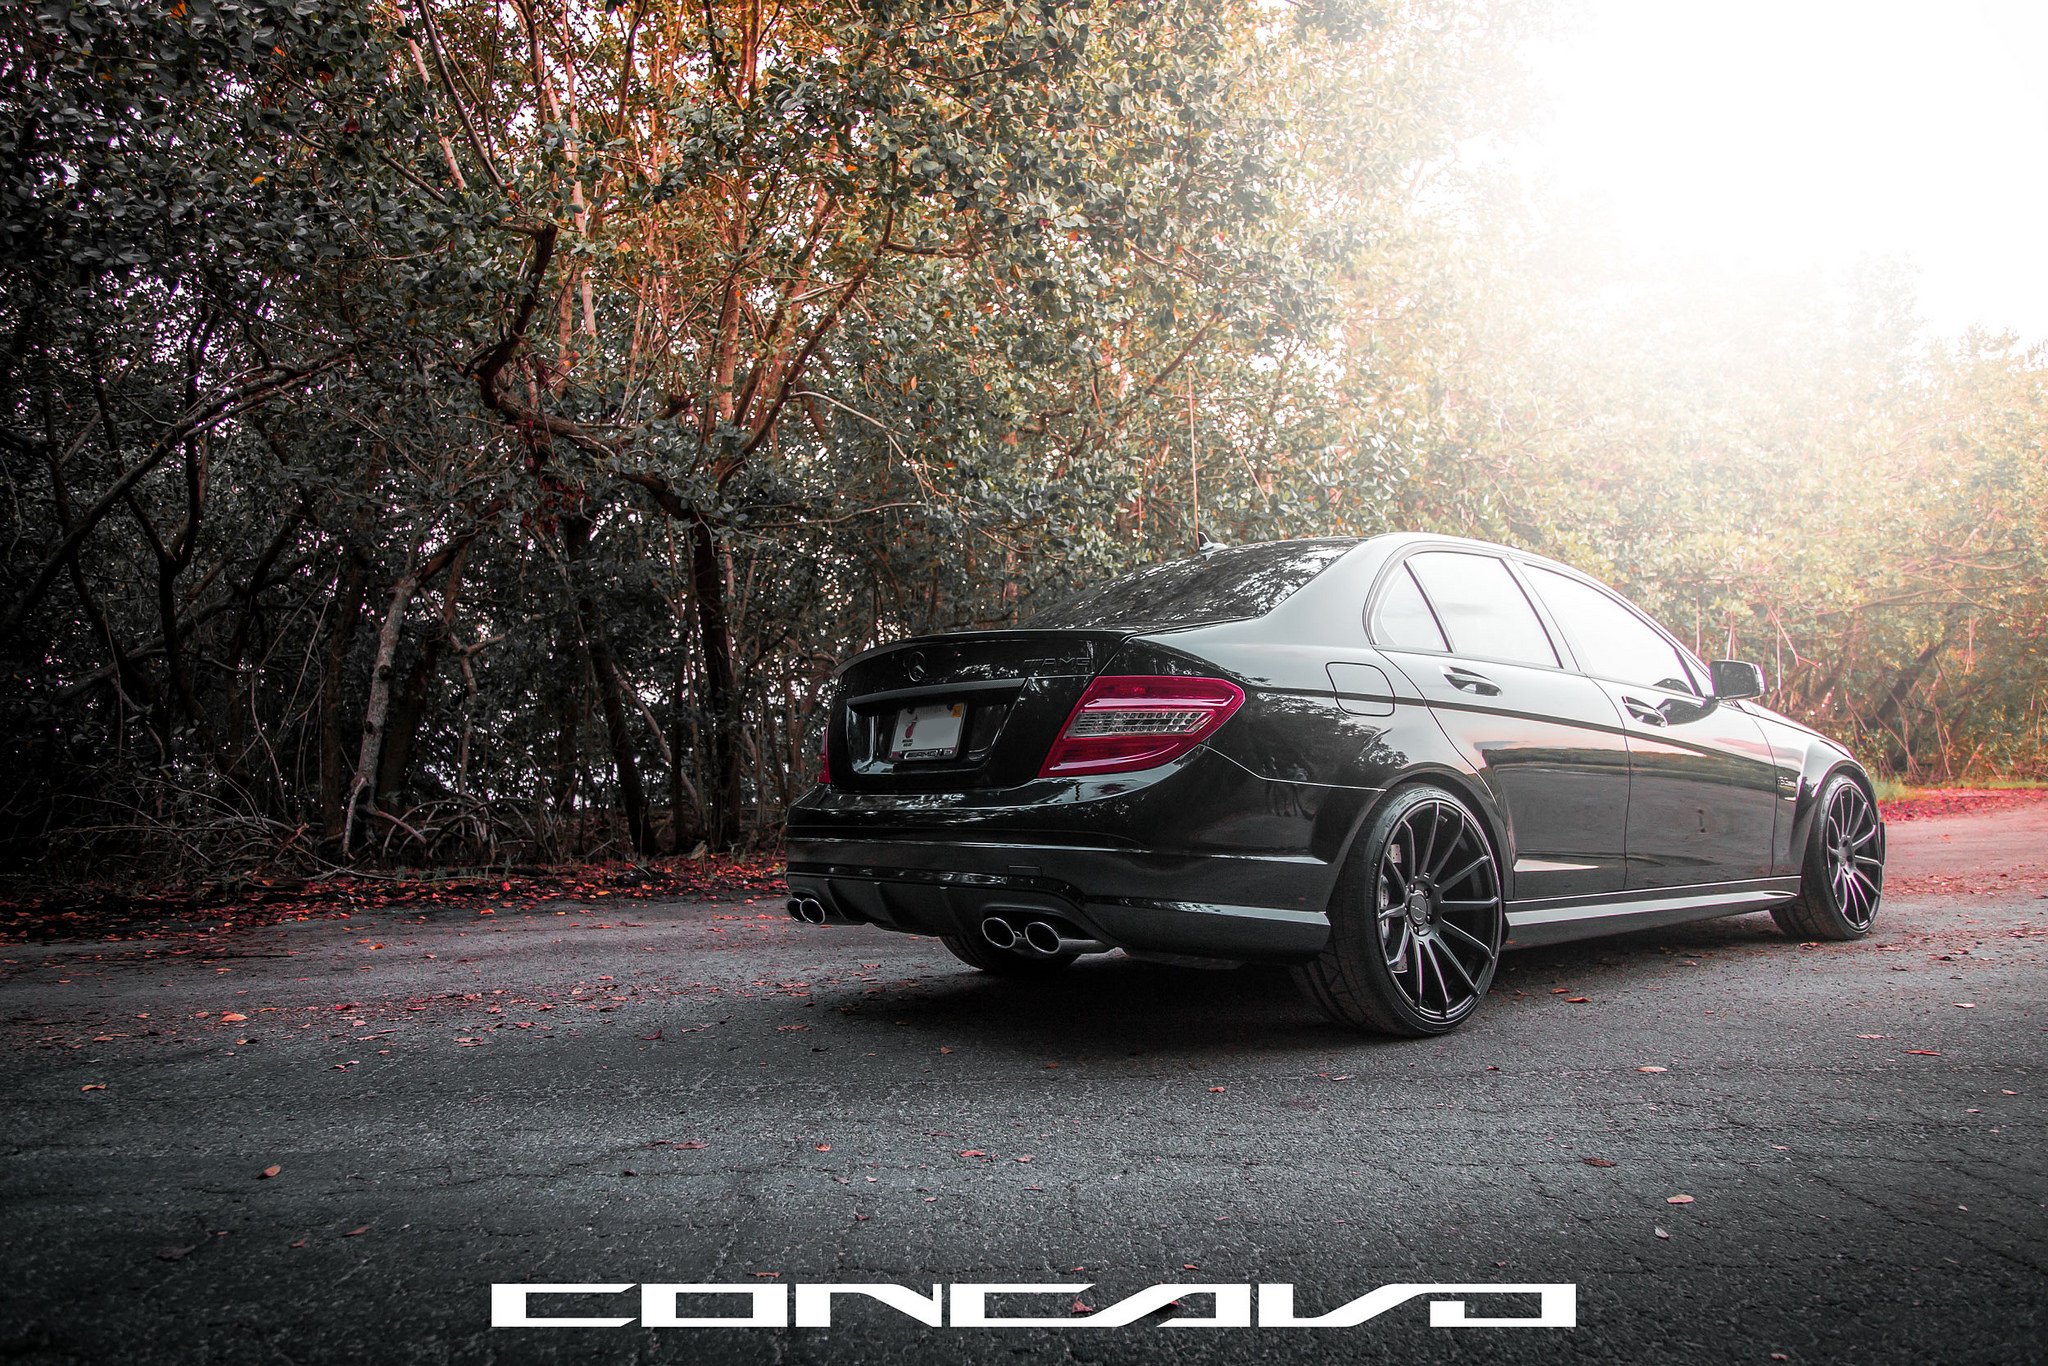 mercedes, Benz, C63, Amg, Tuning, Concavo, Wheels, Cars Wallpaper